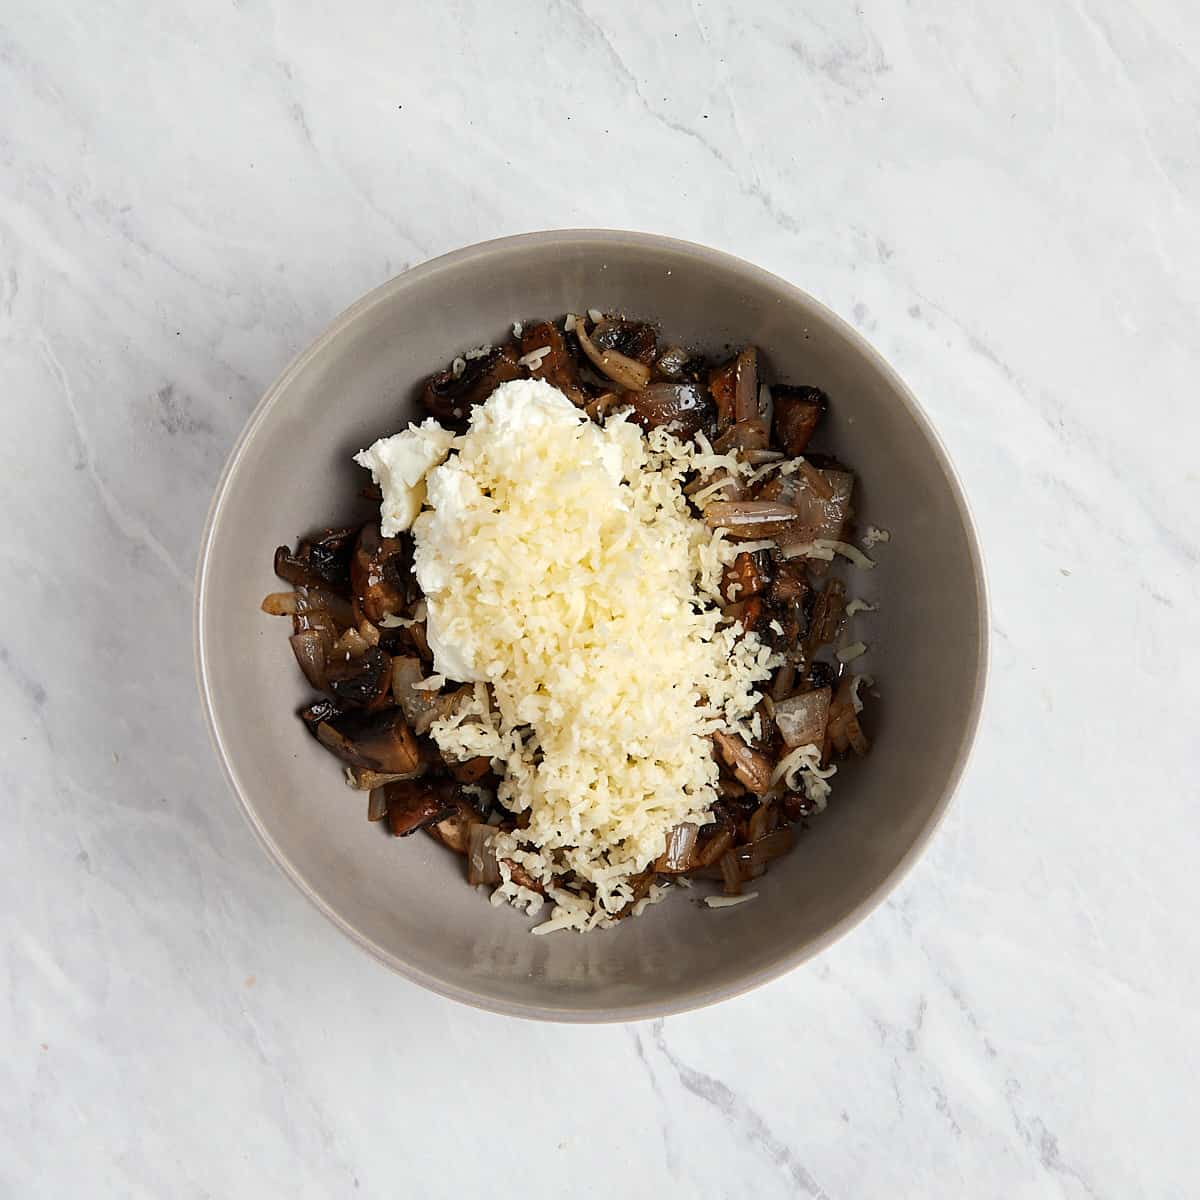 mushroom, shallot, and cheese in a bowl that has not been combined